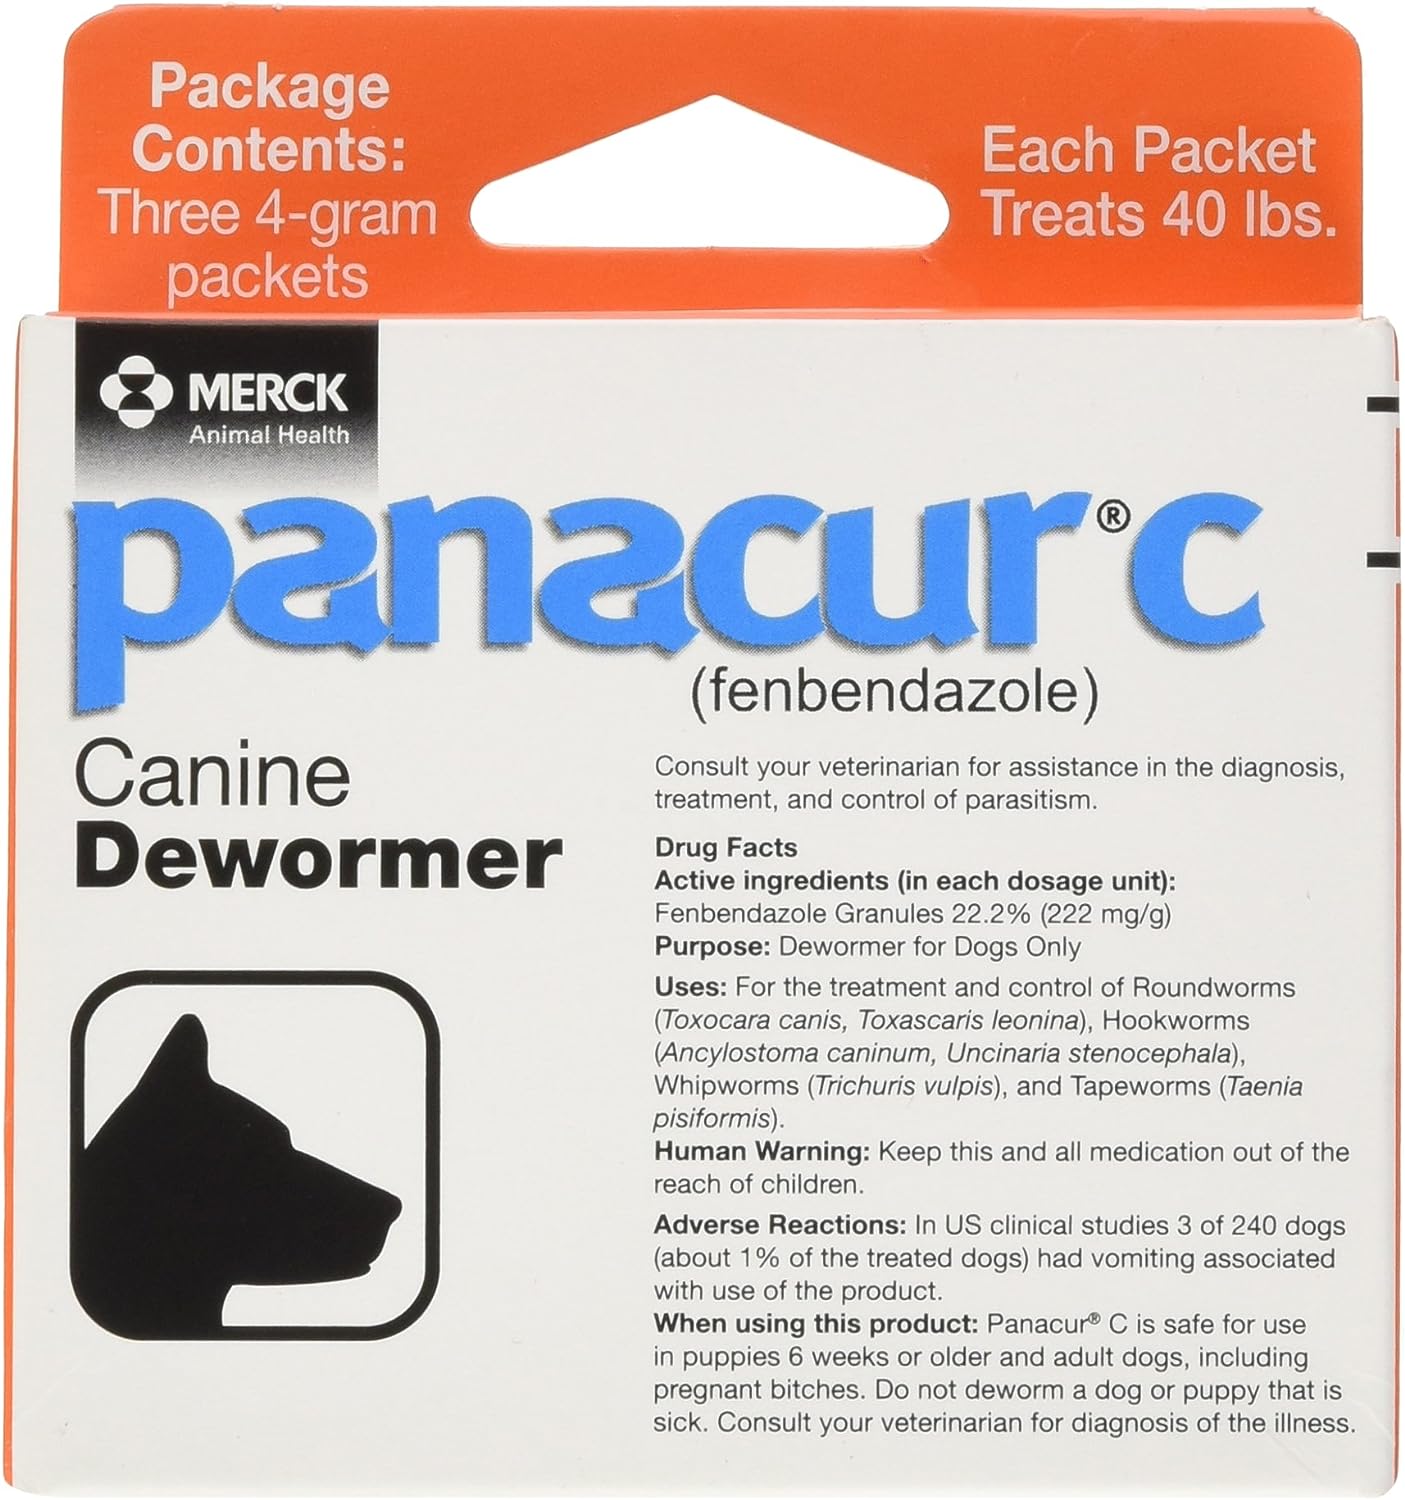 Panacur C Canine Dewormer (Fenbendazole), 4 Gram, 3 Count (Pack of 1), Red